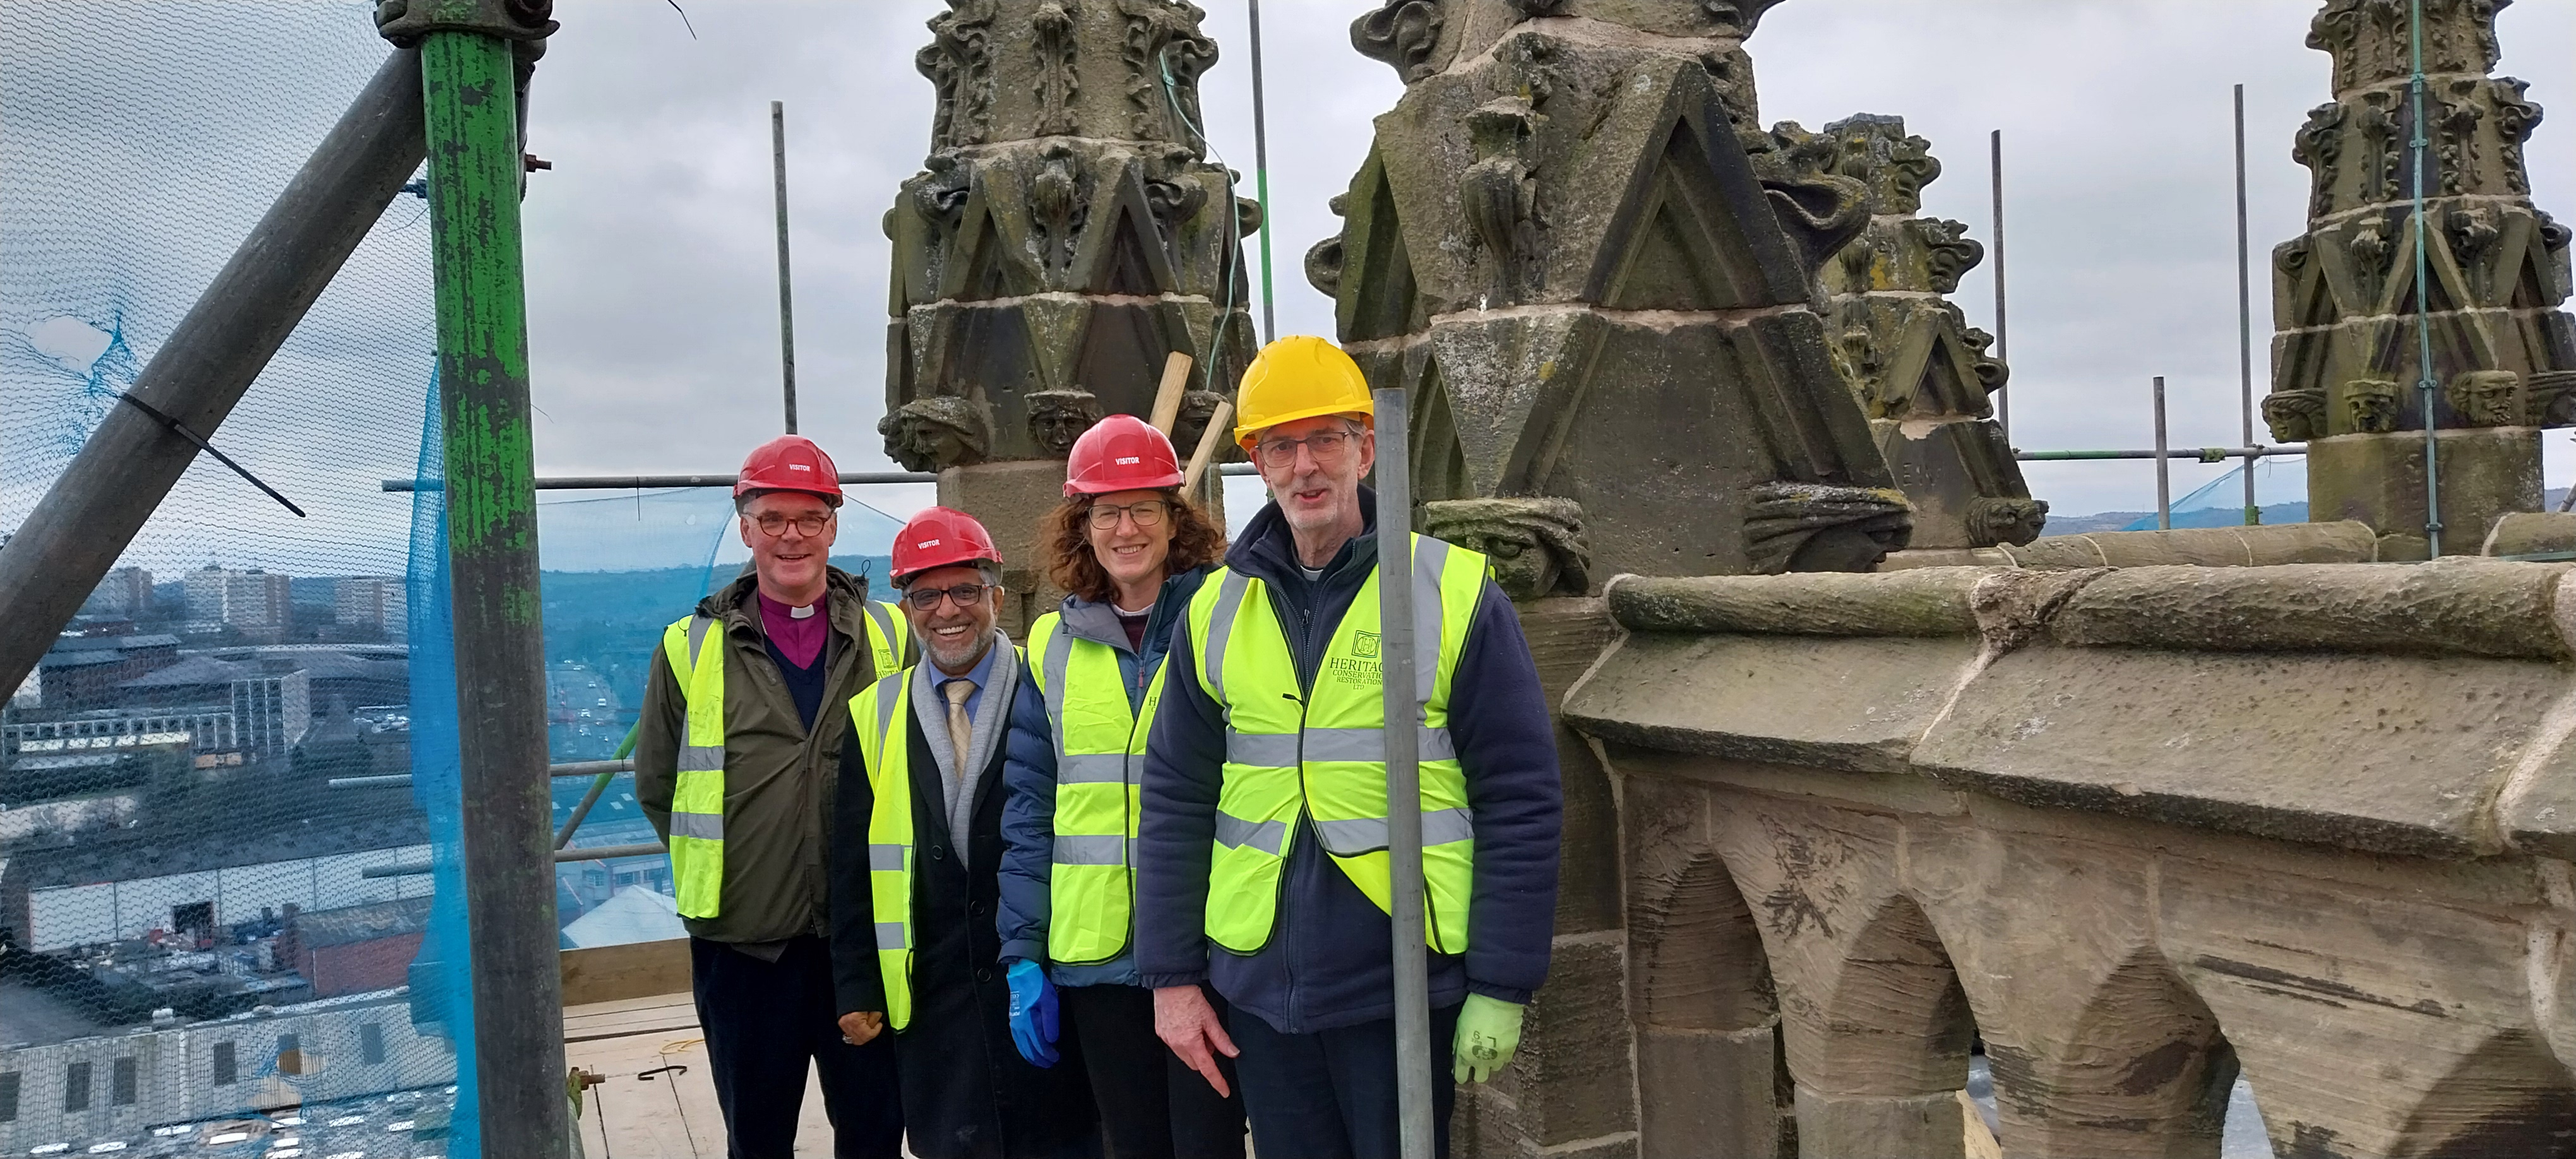 Rt Revd Matthew Parker, Councillor Majid Khan, The Ven Megan Smith, Revd Phillip Jones on the scaffolding around the tower of St Mark's church, Stoke, with the city skyline behind them